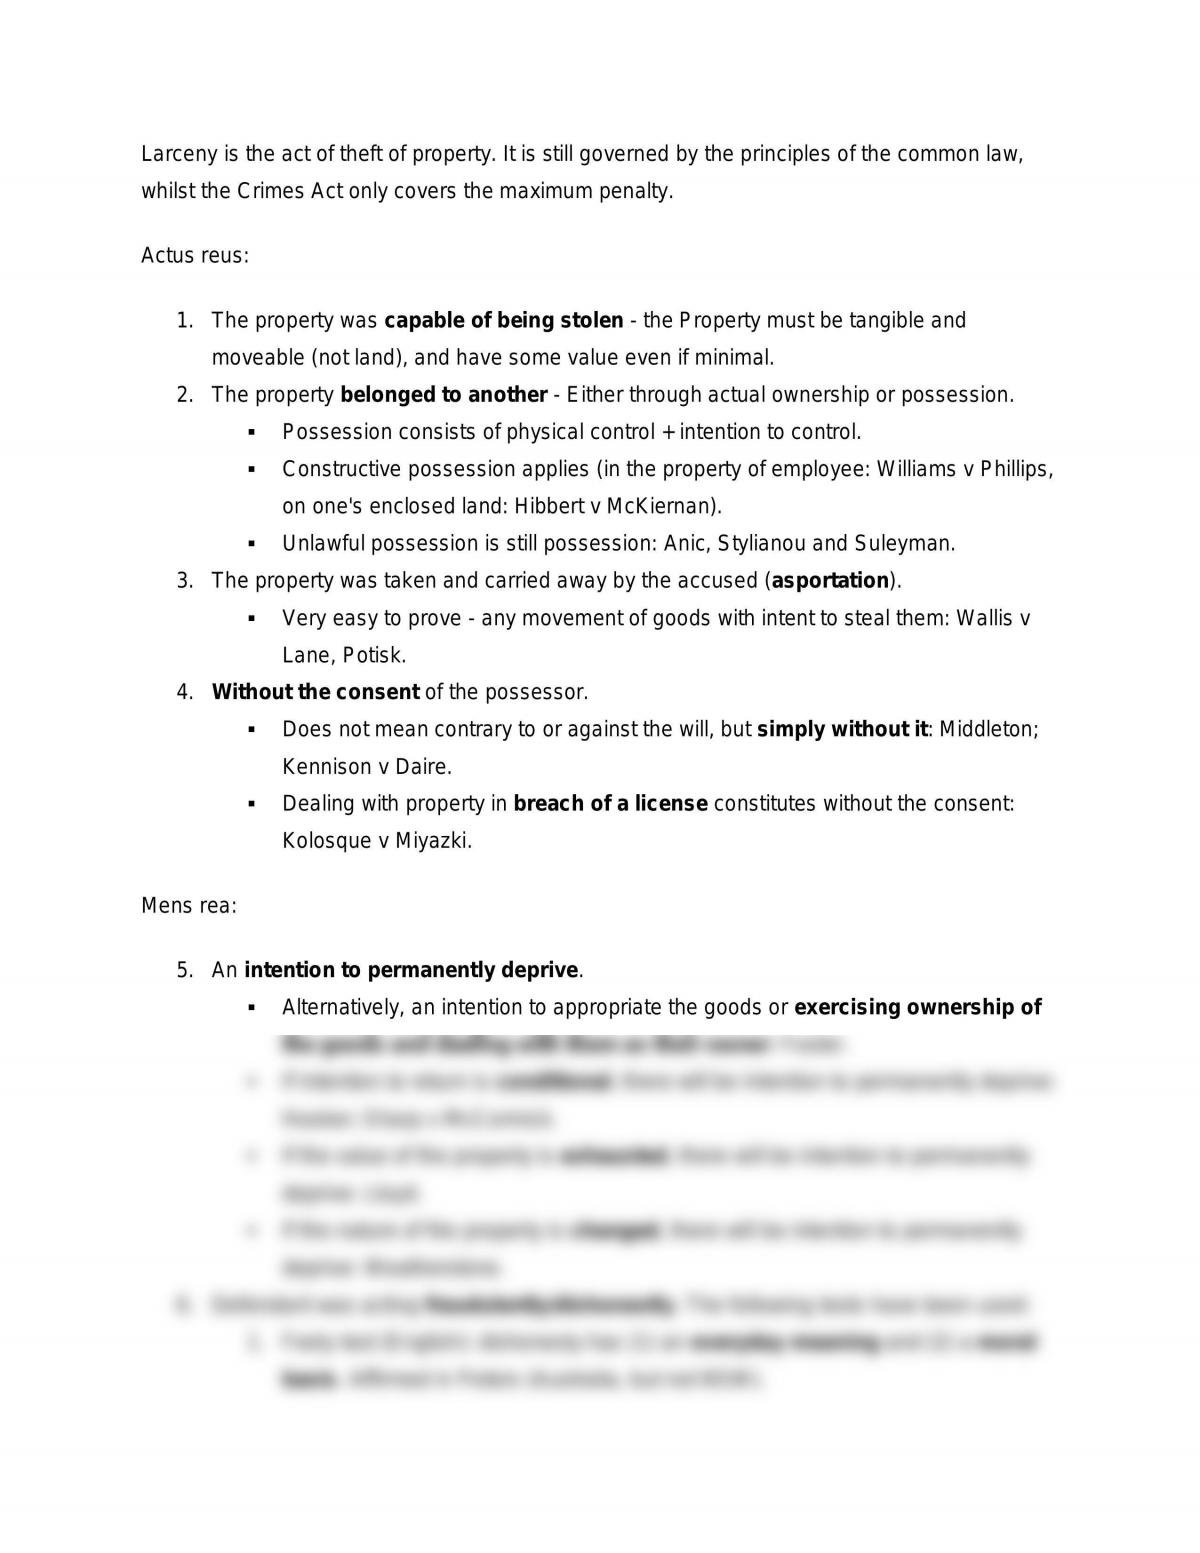 Notes on dishonest acquisition - Page 1